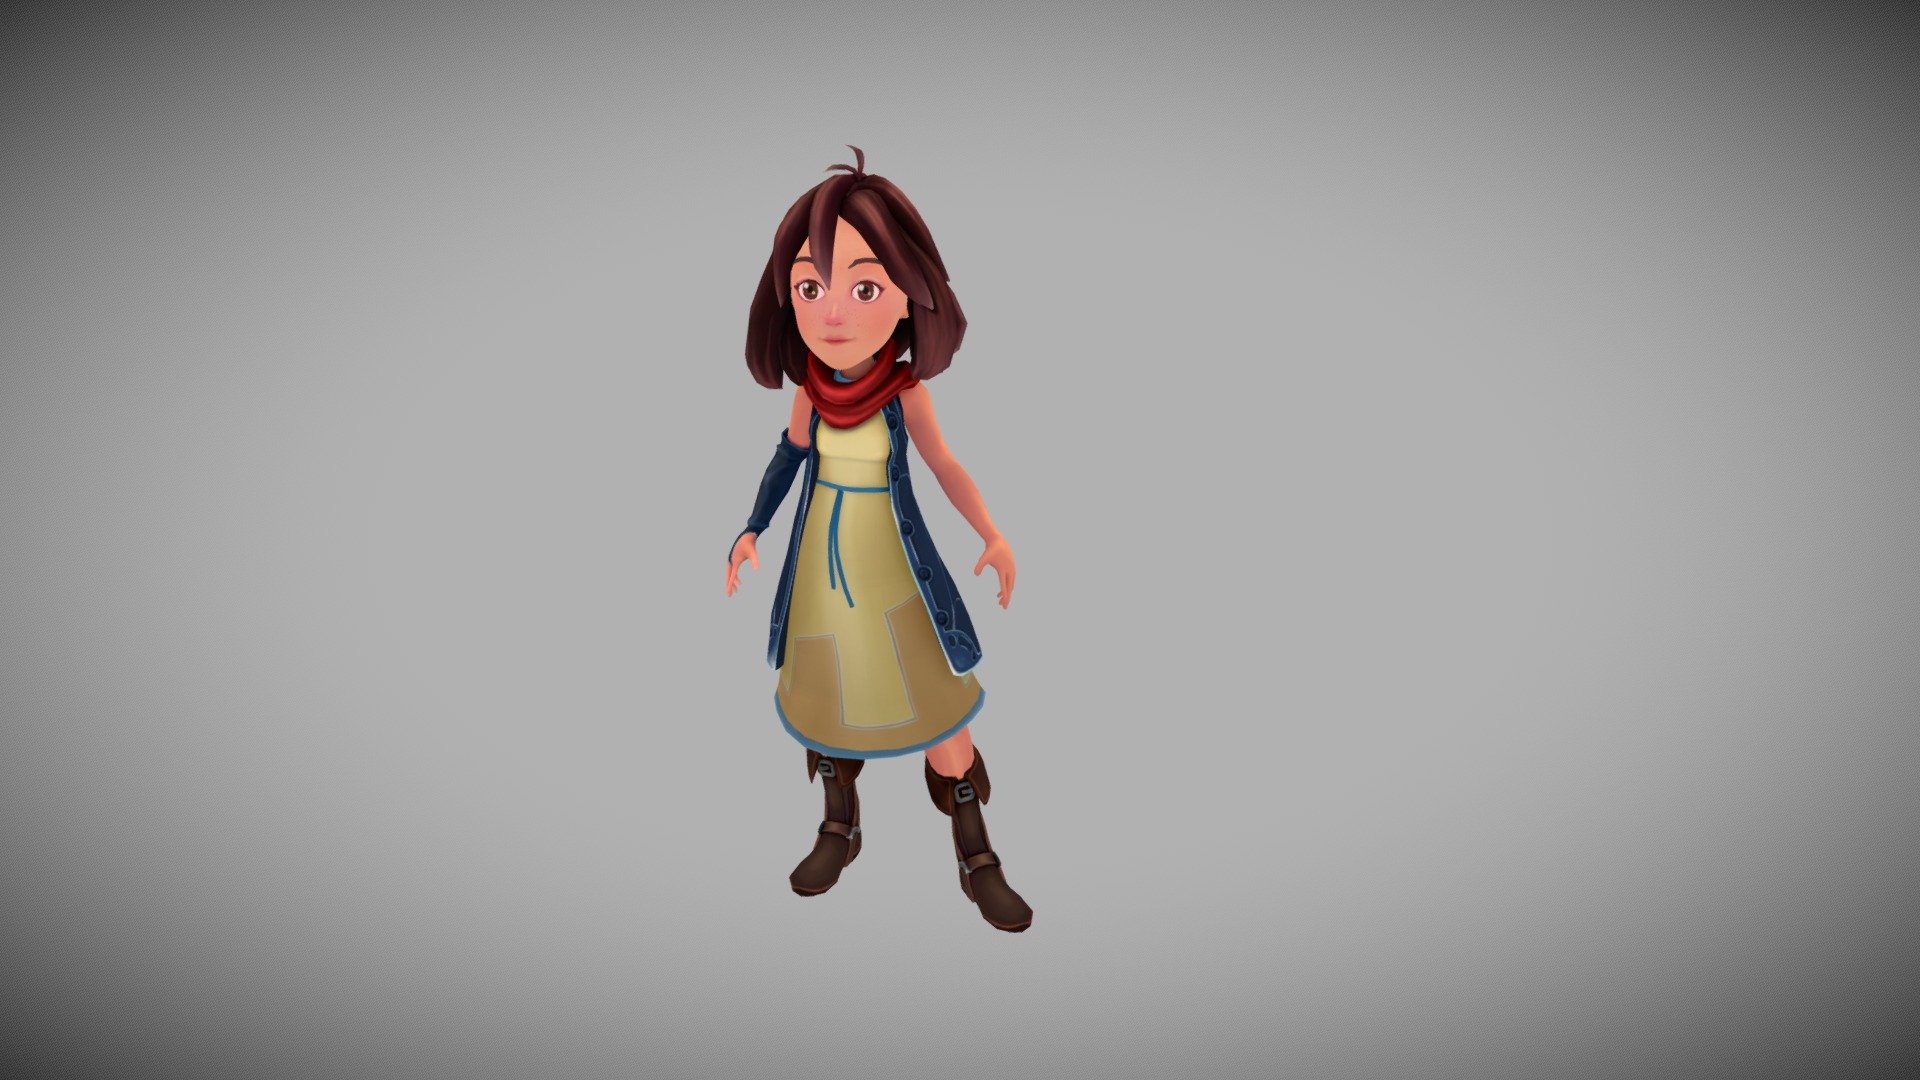 This is May, the main character from the educational coding game May's Journey (www.maysjourney.com), created by Chaima Jemmali. Character design and concept art by Ali Swei (www.aliswei.com)
Modeled in Maya, face and hair sculpted in ZBrush, texturing started in Substance Painter and mostly done in 3DCoat. This is a pose test using Maya's auto rig 3d model